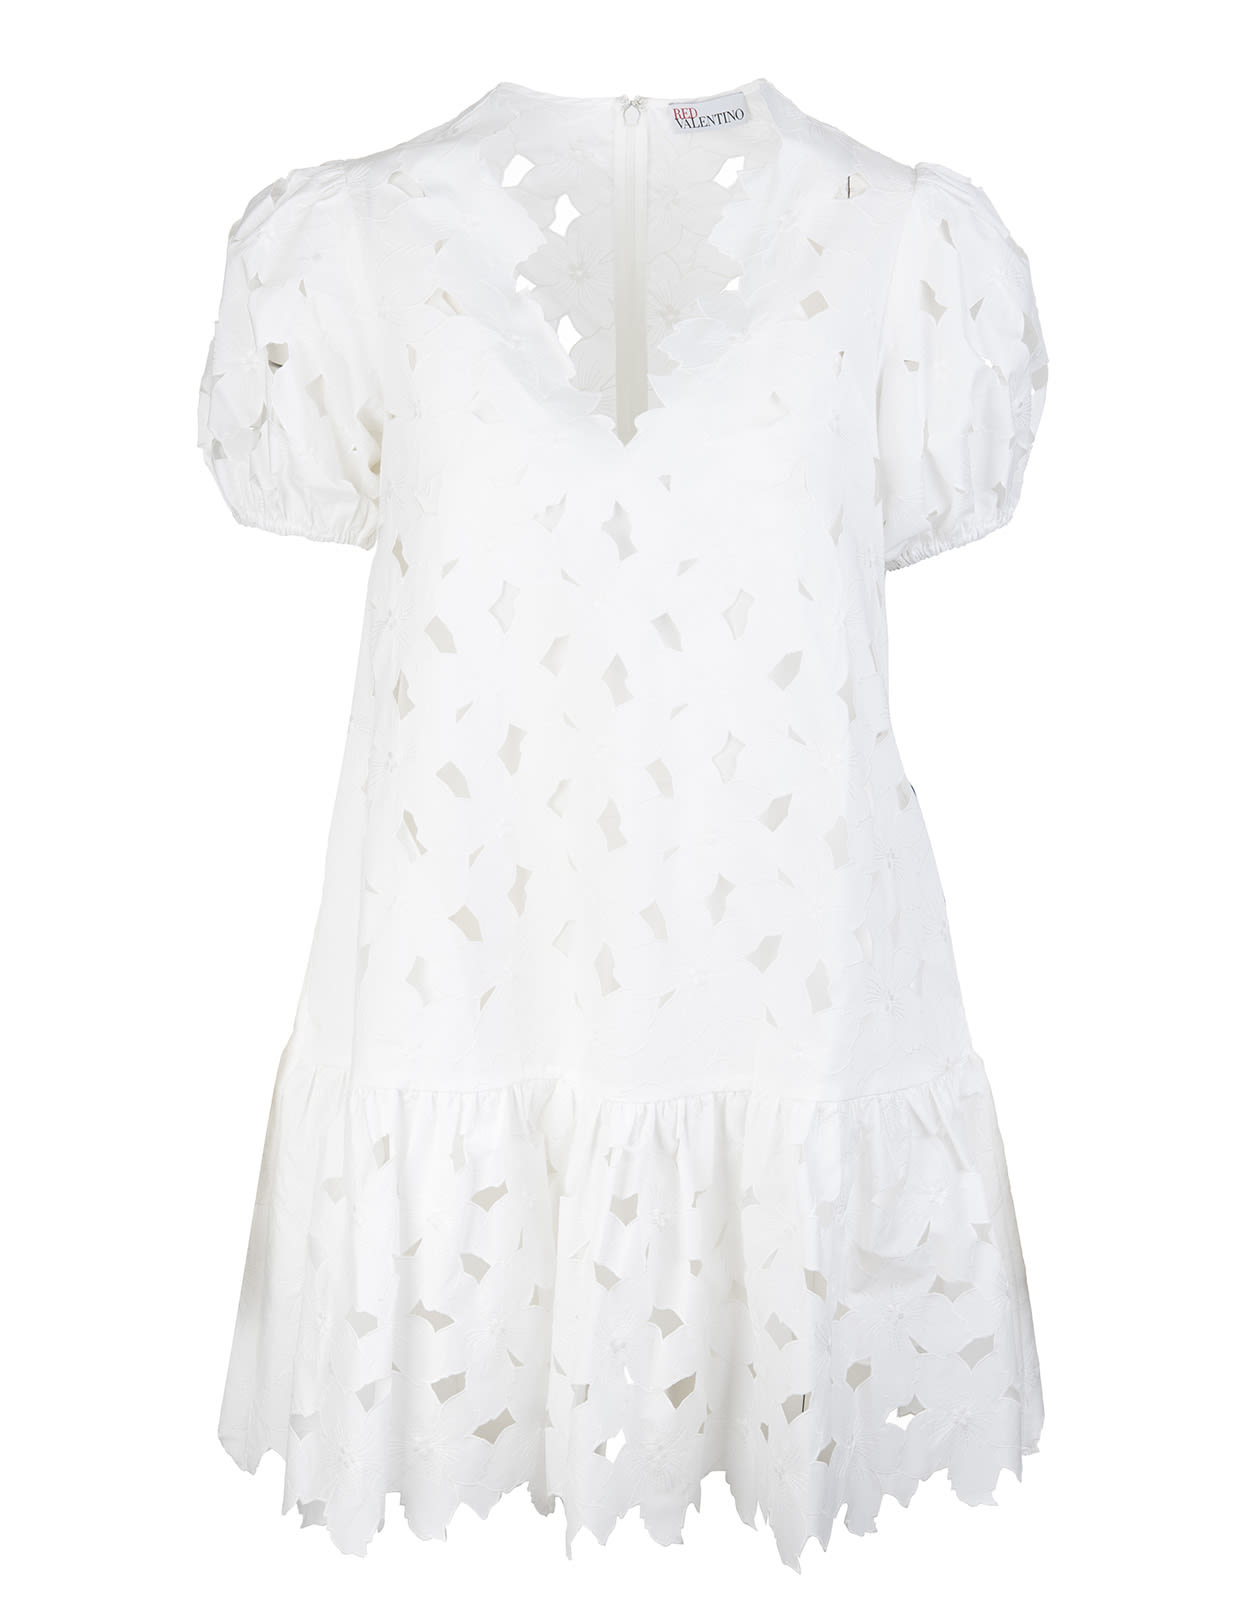 Photo of  RED Valentino White Short Dress Woman With Cut-out Flowers- shop RED Valentino Dresses online sales